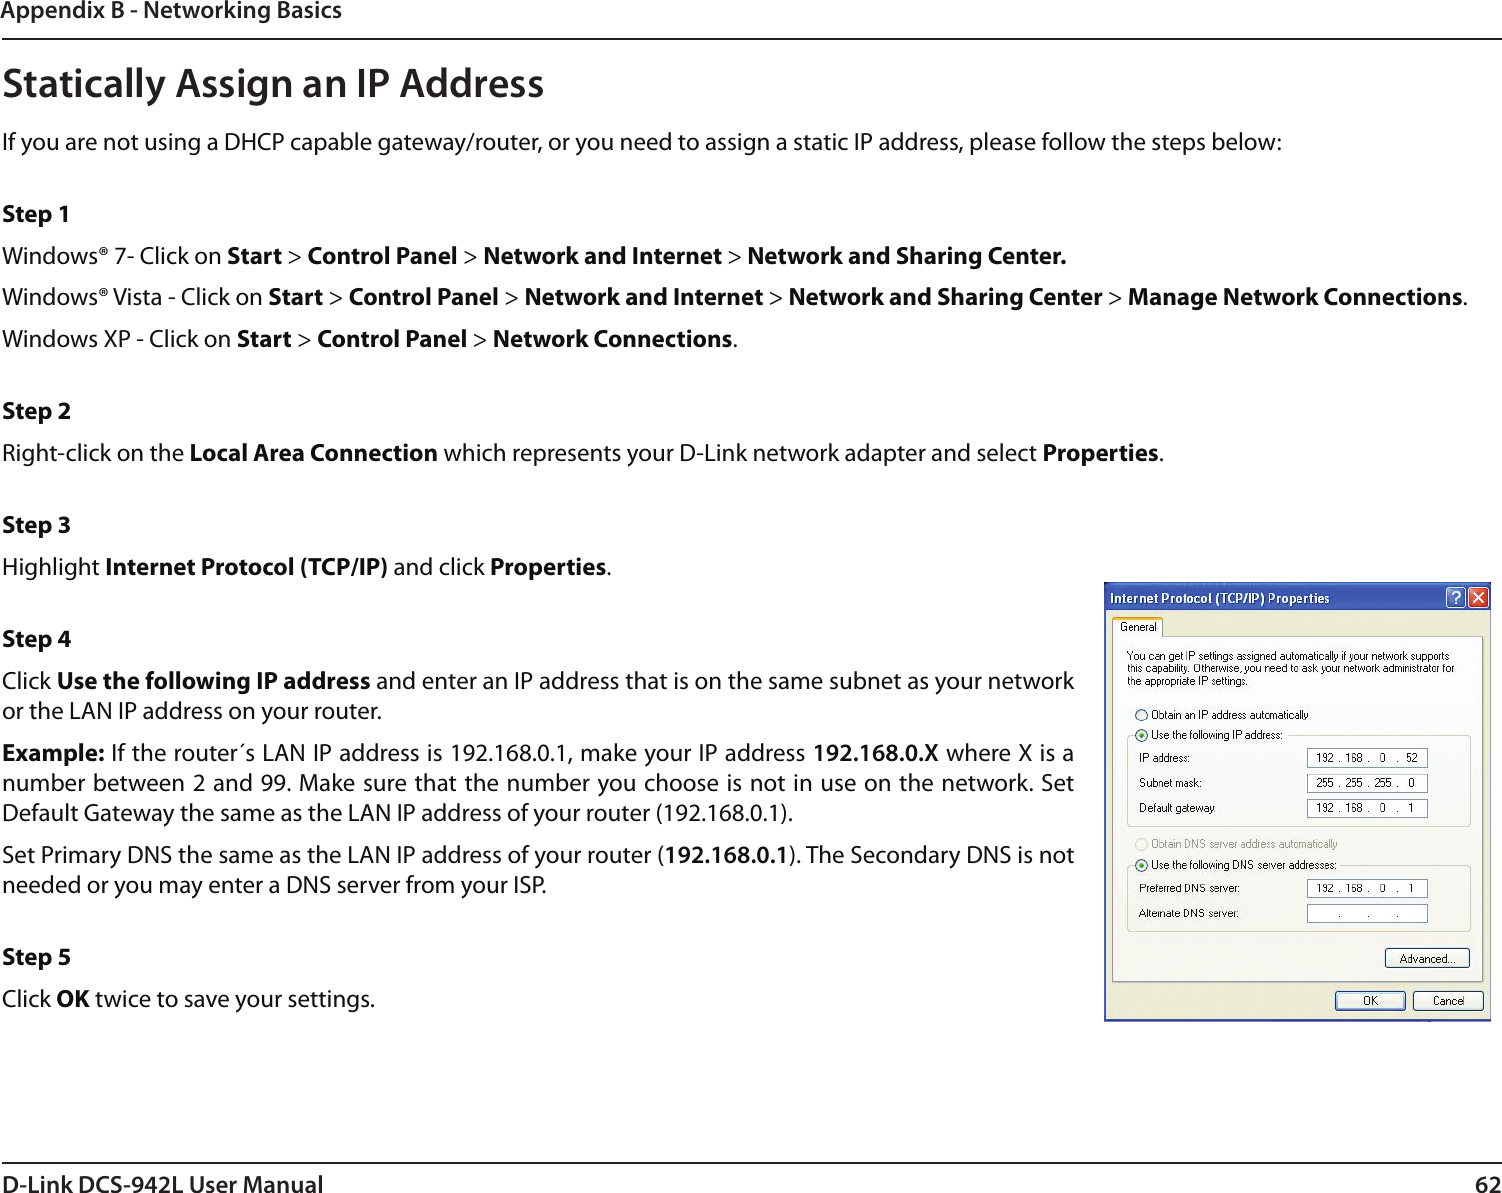 62D-Link DCS-942L User ManualAppendix B - Networking BasicsStatically Assign an IP AddressIf you are not using a DHCP capable gateway/router, or you need to assign a static IP address, please follow the steps below: Step 1Windows® 7- Click on Start &gt; Control Panel &gt; Network and Internet &gt; Network and Sharing Center.Windows® Vista - Click on Start &gt; Control Panel &gt; Network and Internet &gt; Network and Sharing Center &gt; Manage Network Connections. Windows XP - Click on Start &gt; Control Panel &gt; Network Connections. Step 2Right-click on the Local Area Connection which represents your D-Link network adapter and select Properties. Step 3Highlight Internet Protocol (TCP/IP) and click Properties. Step 4Click Use the following IP address and enter an IP address that is on the same subnet as your network or the LAN IP address on your router. Example: If the router´s LAN IP address is 192.168.0.1, make your IP address 192.168.0.X where X is a number between 2 and 99. Make sure that the number you choose is not in use on the network. Set Default Gateway the same as the LAN IP address of your router (192.168.0.1). Set Primary DNS the same as the LAN IP address of your router (192.168.0.1). The Secondary DNS is not needed or you may enter a DNS server from your ISP. Step 5Click OK twice to save your settings.